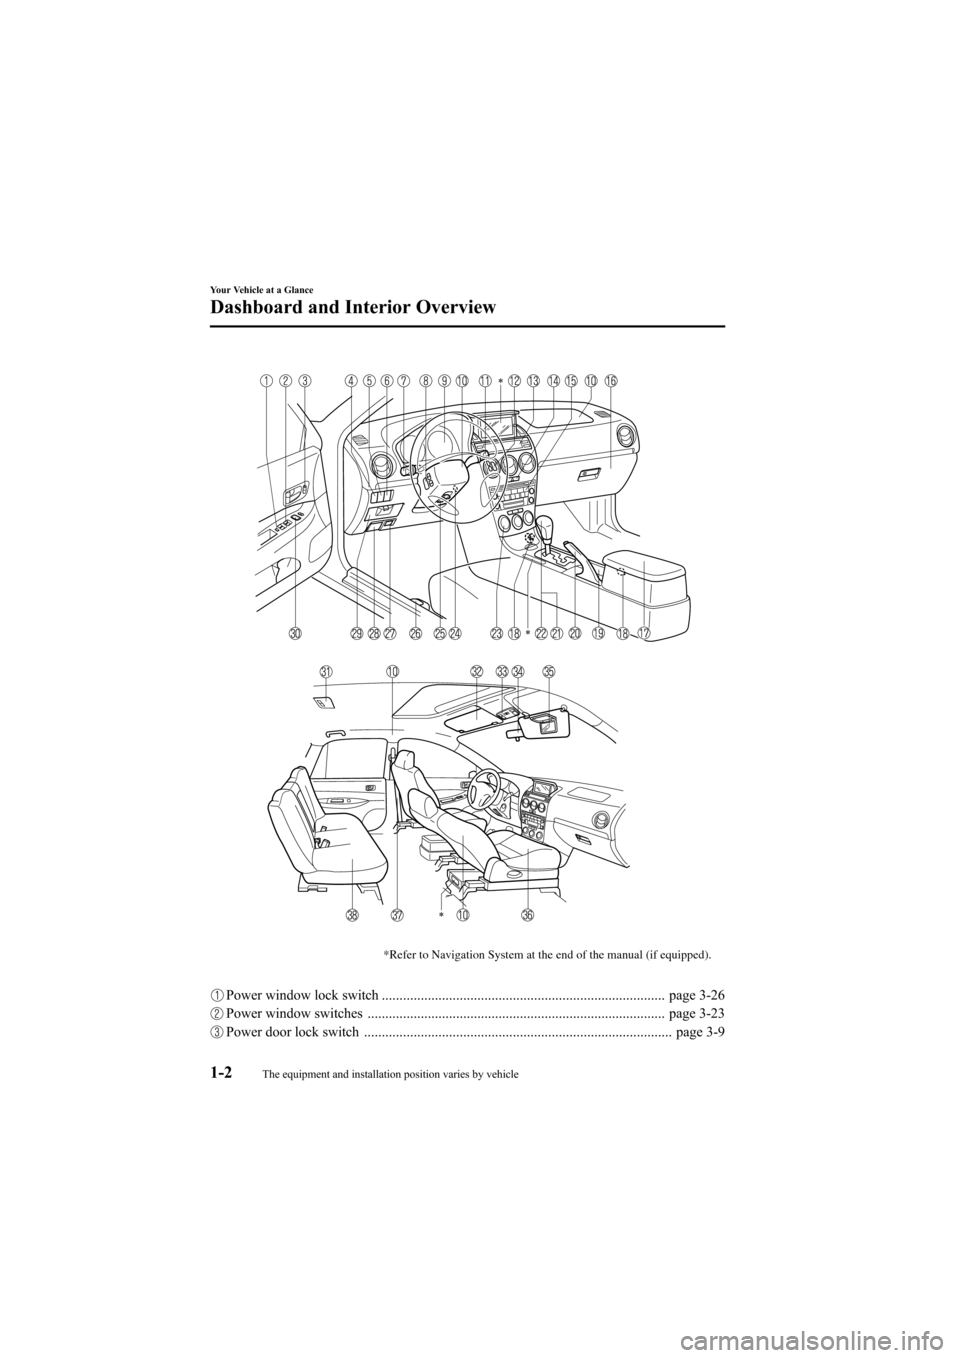 MAZDA MODEL 6 2008  Owners Manual (in English) Black plate (8,1)
*Refer to Navigation System at the end of the manual (if equipped).
Power window lock switch ................................................................................ page 3-2